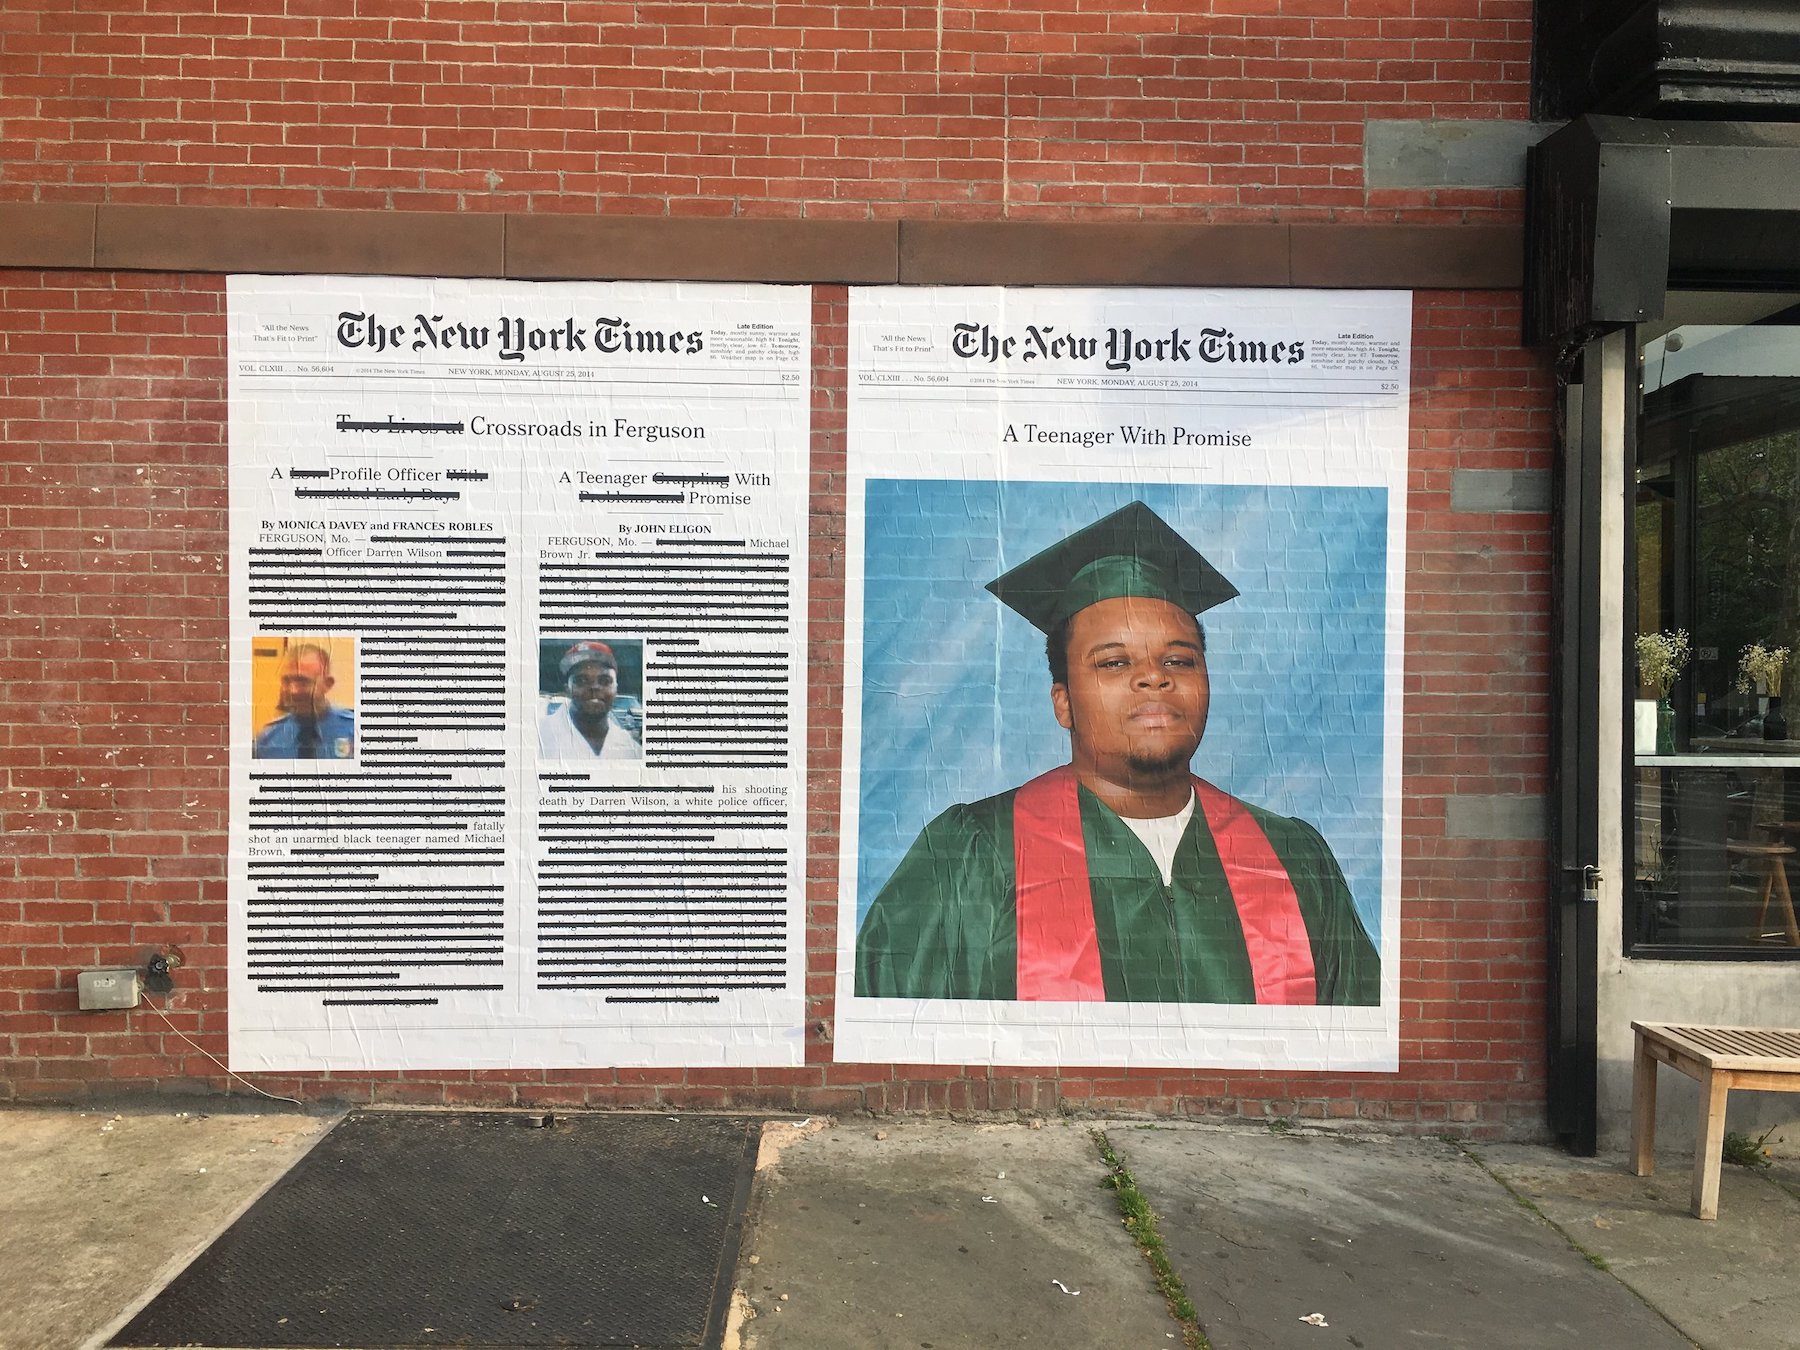 Alexandra Bell's marked up pages of the New York Times featuring the death of Michael Brown hang on a brick wall in Brooklyn, New York.